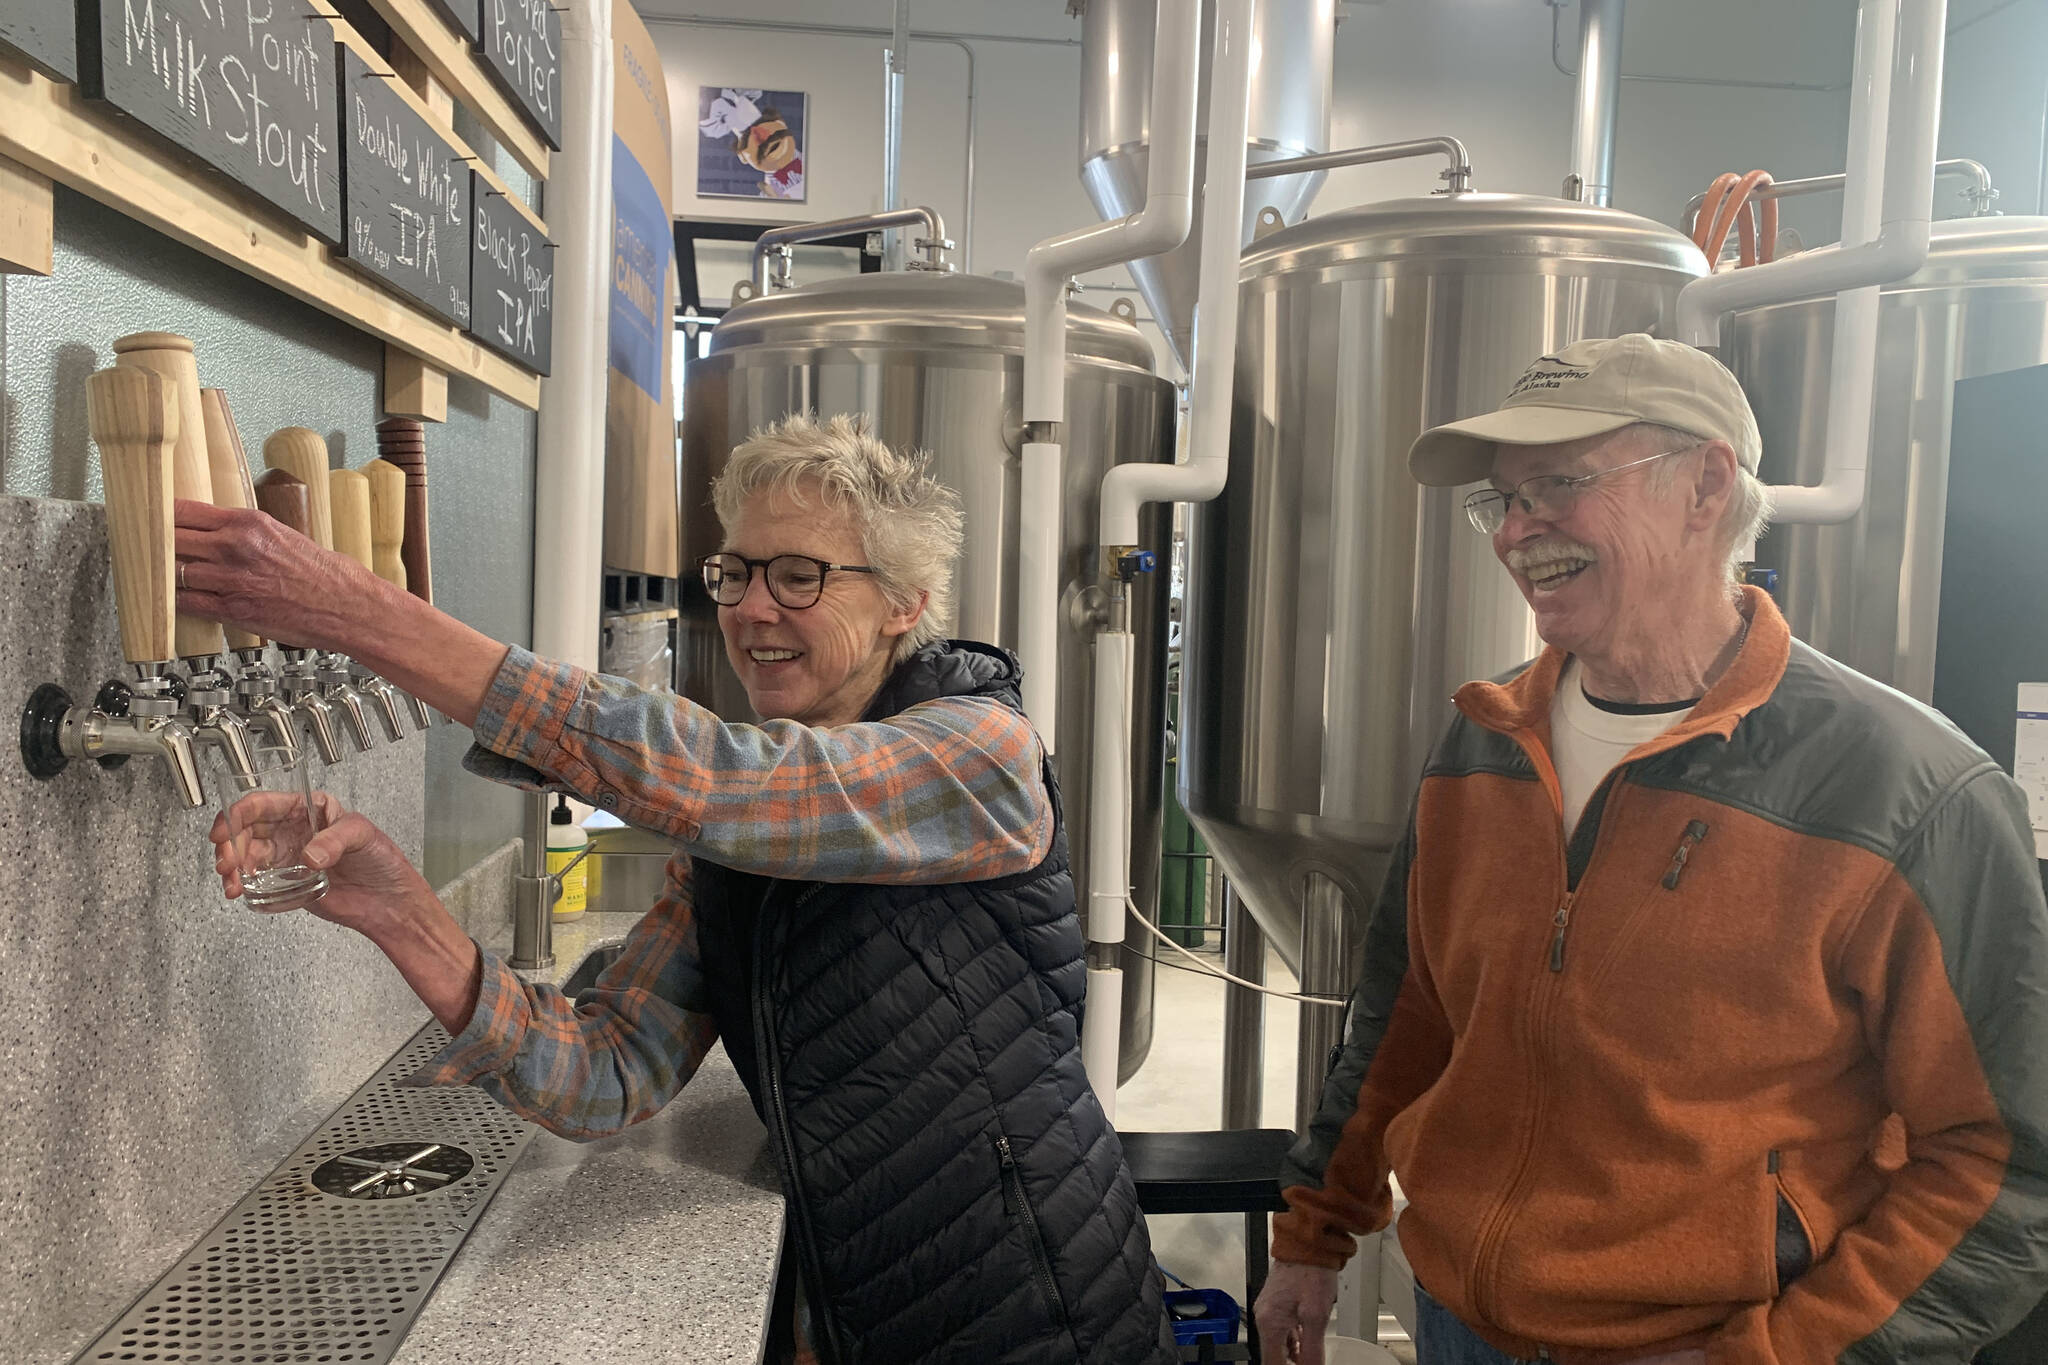 Sherry and Don Stead, owners of Grace Ridge Brewing, celebrate one year in their new location on Smoky Bay Way, Friday, Feb 3, 2023, in Homer, Alaska. (Photo by Christina Whiting/Homer News)